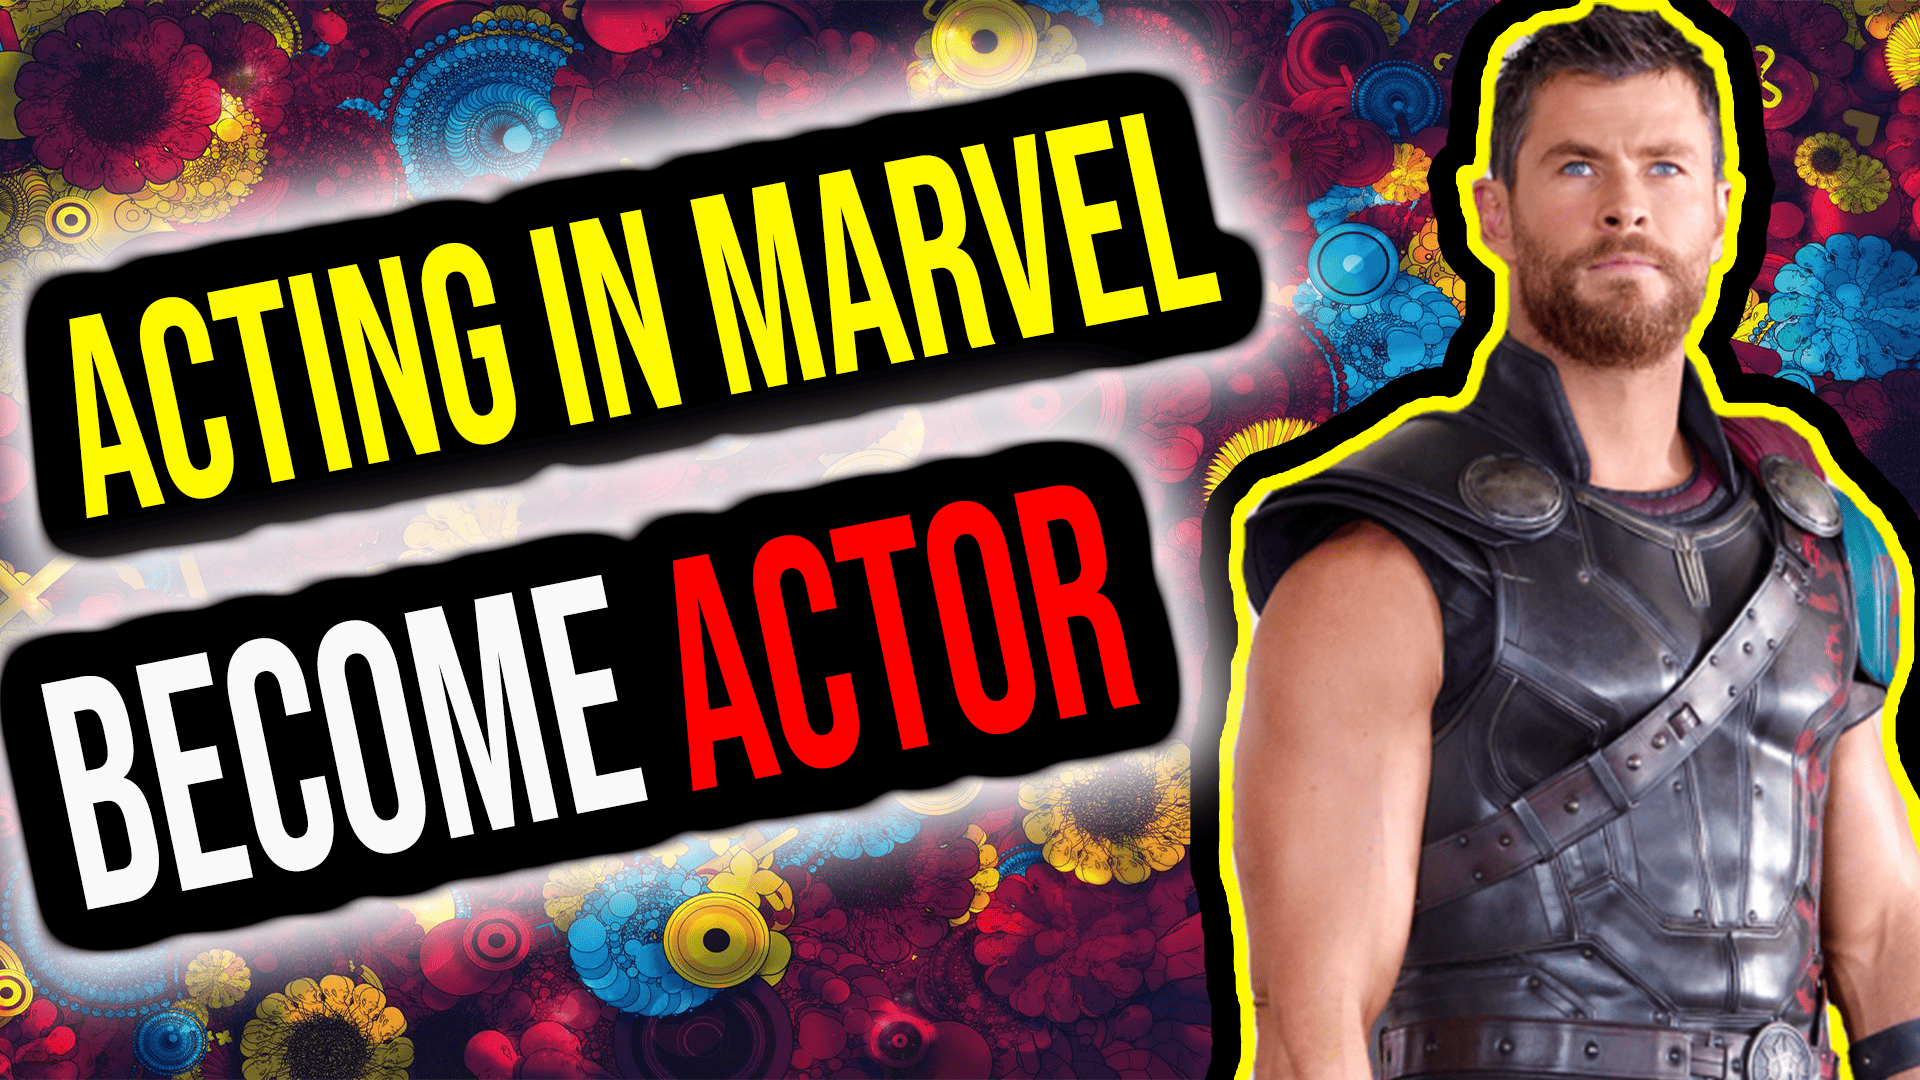 Step Up Your Acting Game: How To Become An Actor For Marvel Movies